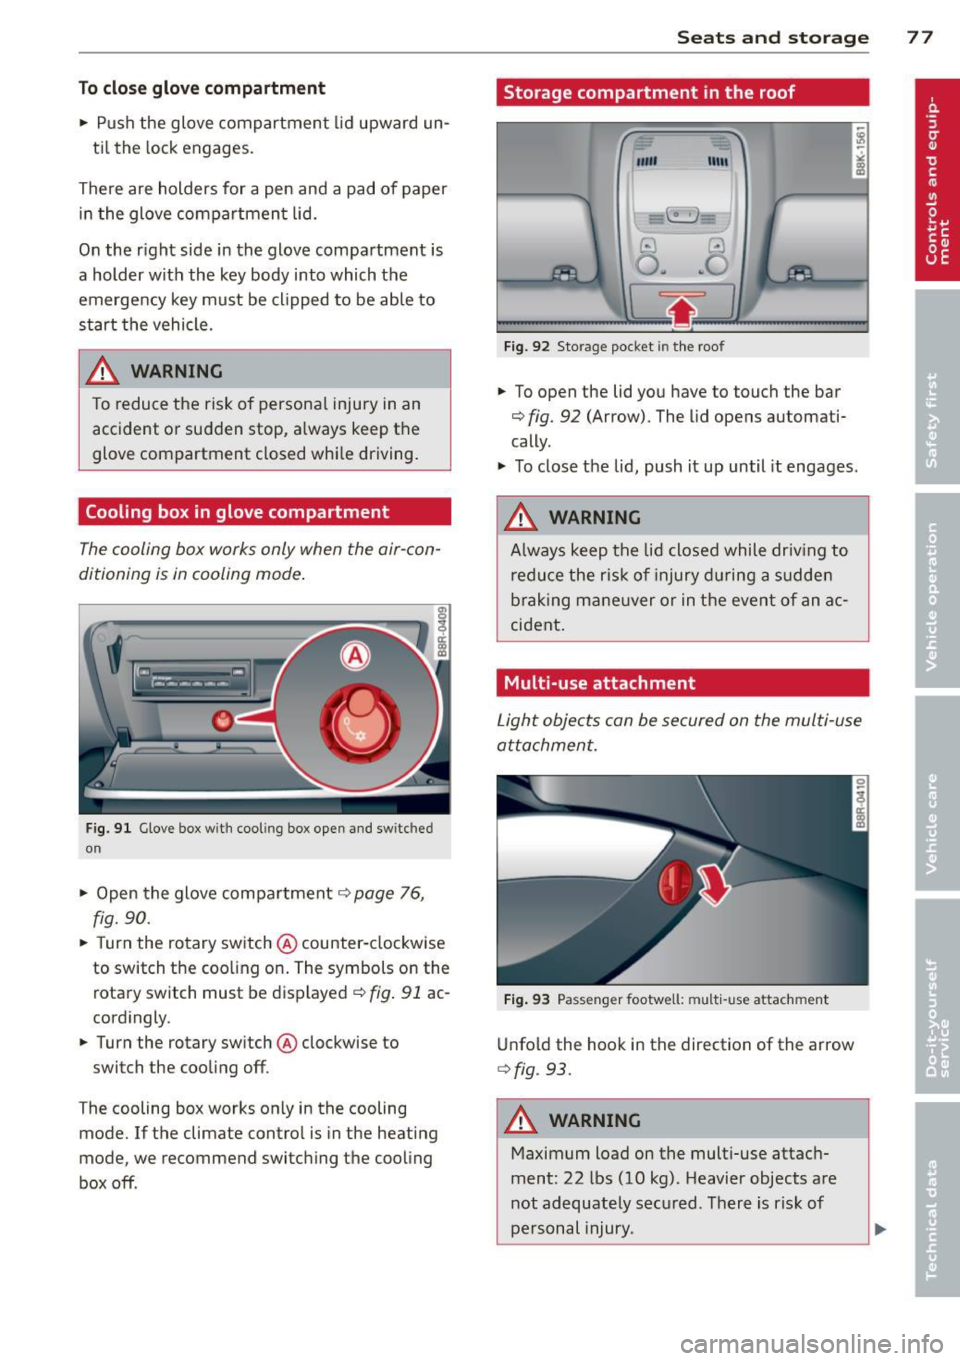 AUDI Q5 2013  Owners Manual To close  glove compartment 
• Push  the glove  compartment  lid upward  un-
ti l the  lock  engages. 
There  are  holders  for  a  pen  and  a  pad  of  paper  in  the  glove  compartment  lid. 
On